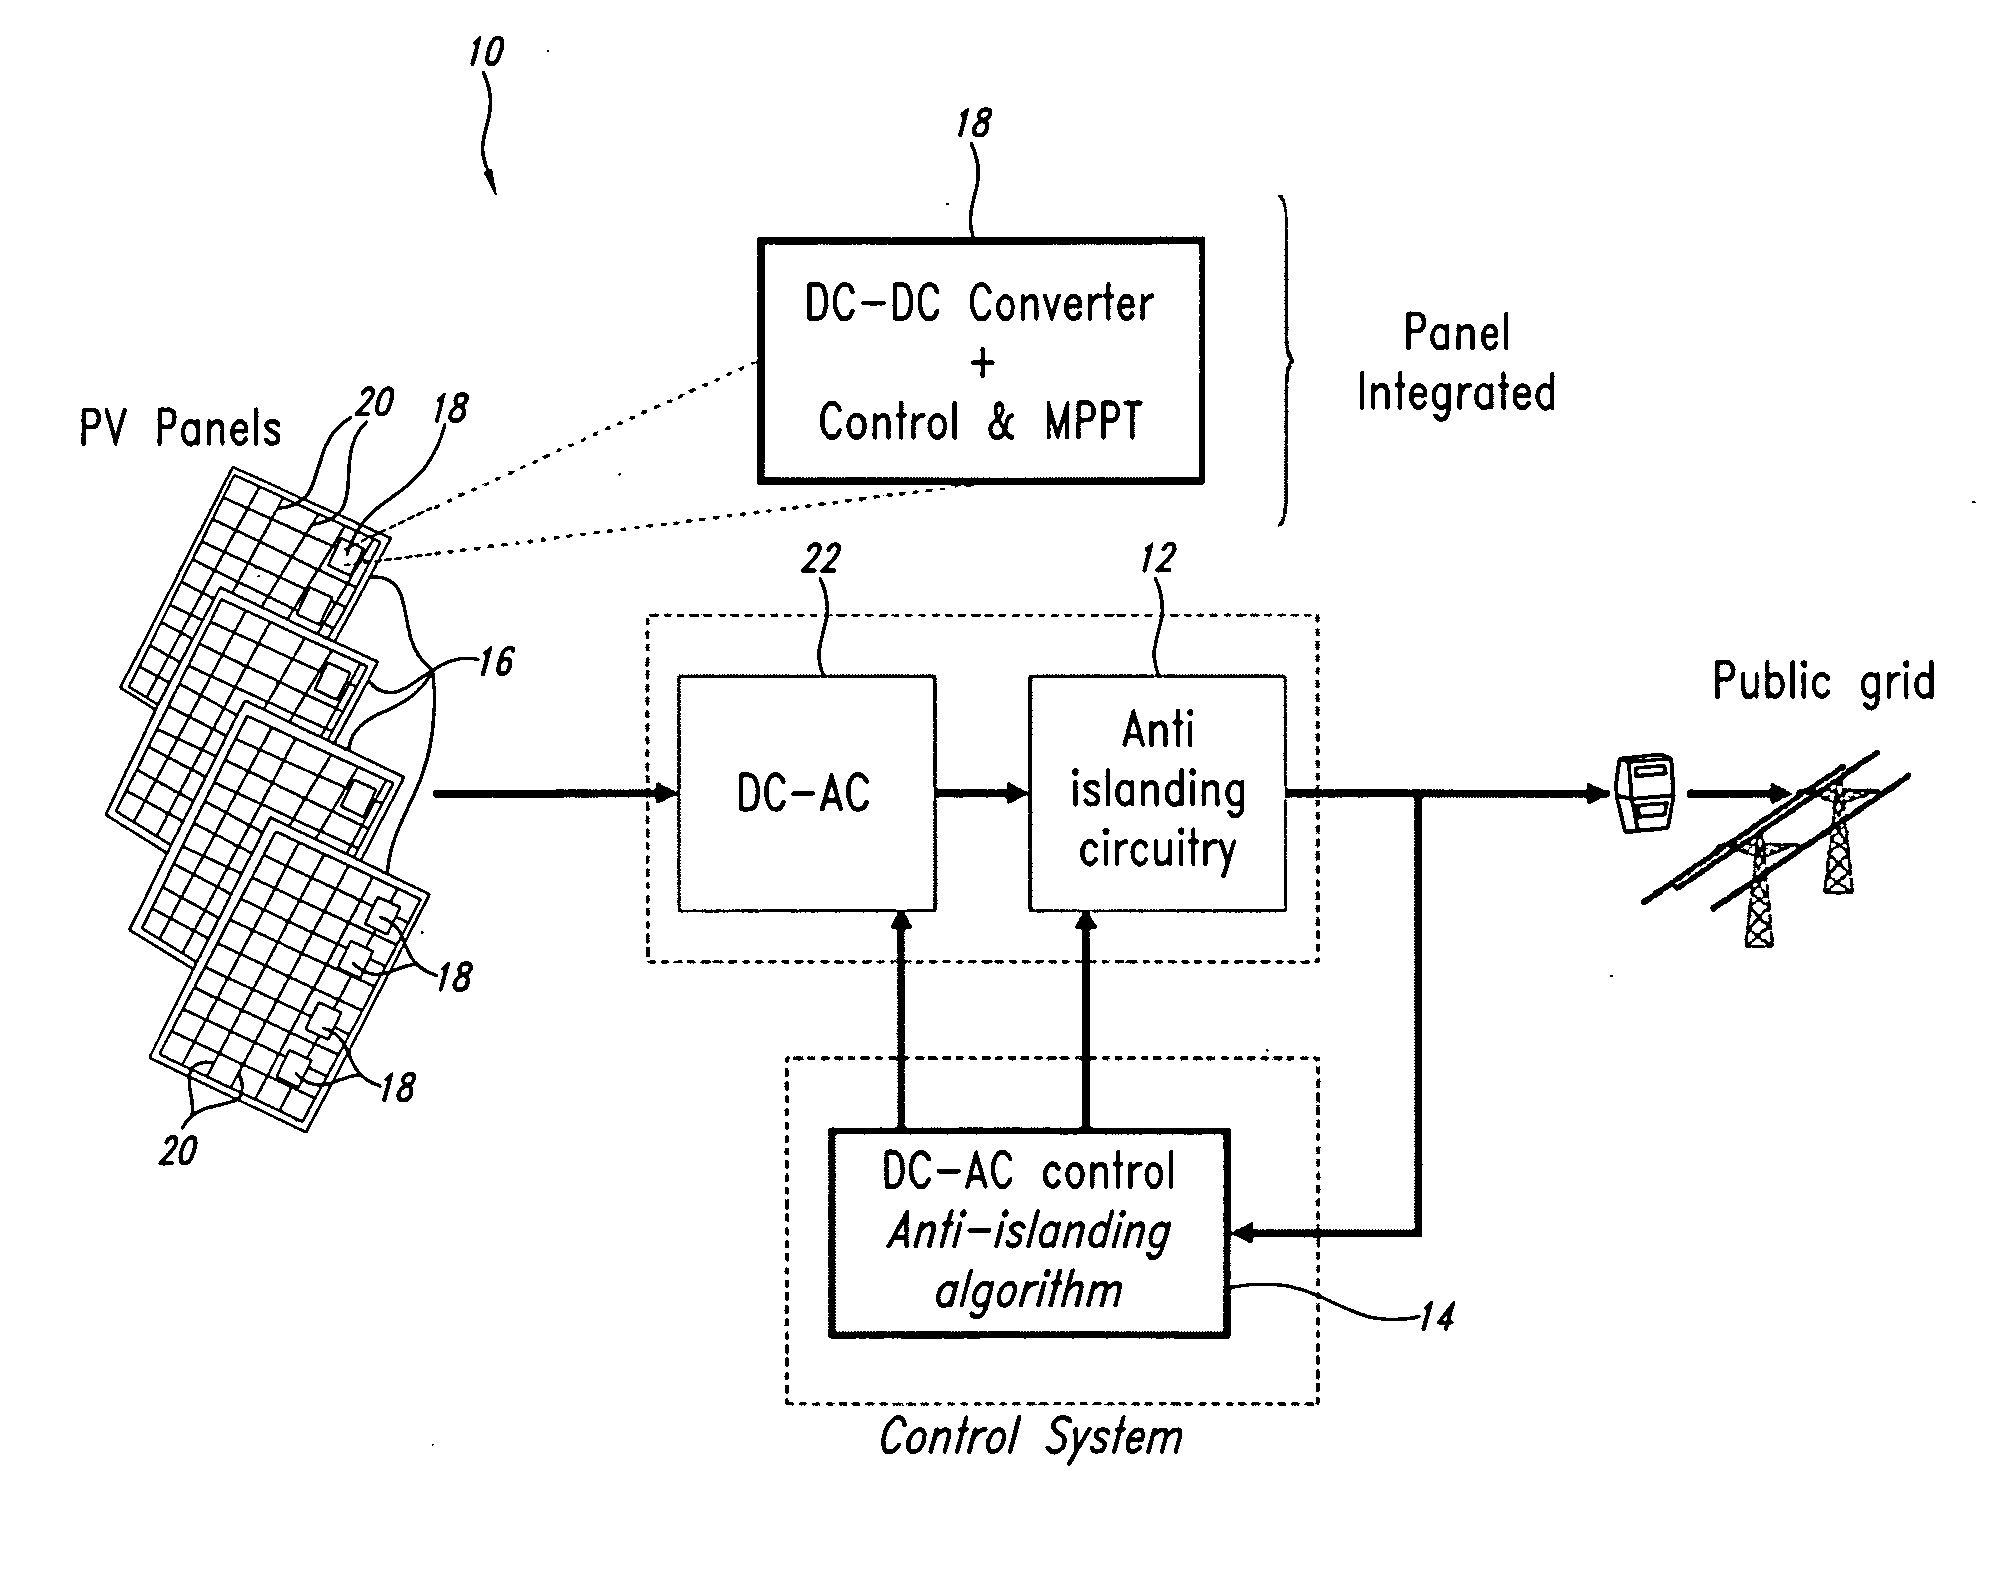 Multi-cellular photovoltaic panel system with dc-dc conversion replicated for groups of cells in series of each panel and photovoltaic panel structure